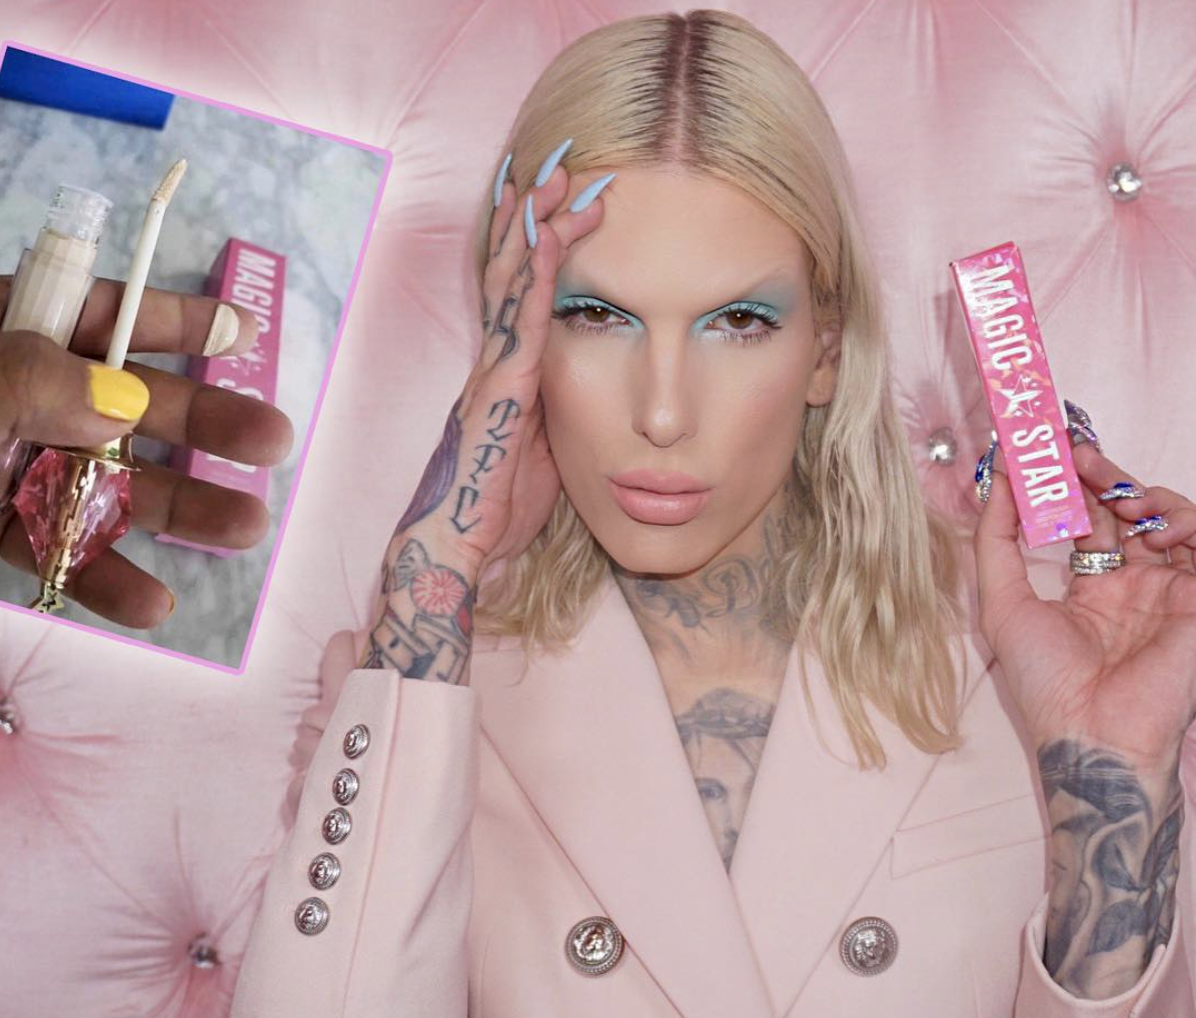 Jeffree Star’s New Makeup Line was Stolen and Leaked, FBI Searches For 2.5 ...